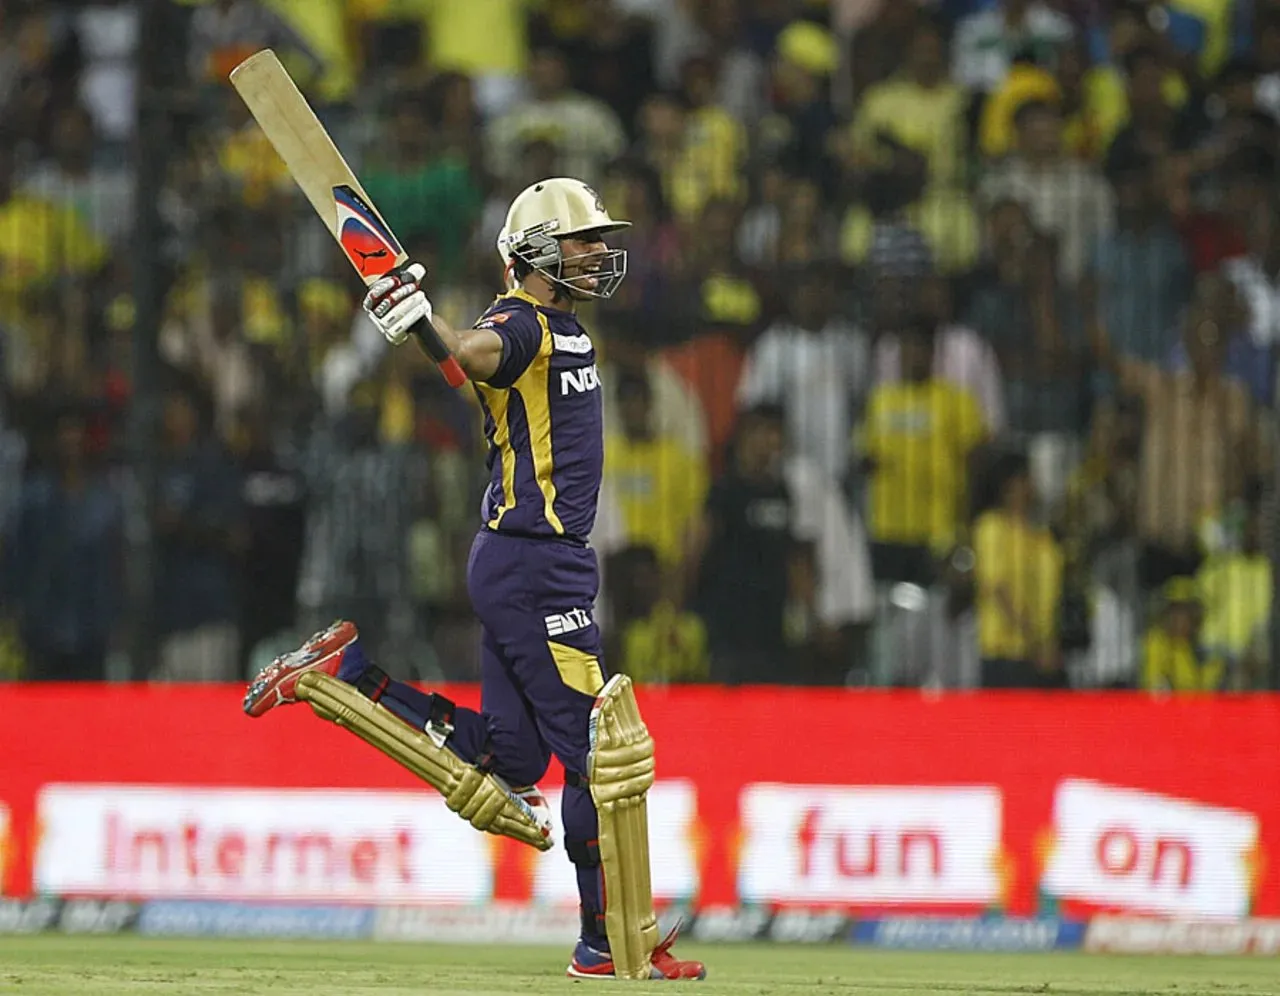 Manoj Tiwary after hitting the winning runs to win the IPL 2012 for KKR.  Image | BCCI